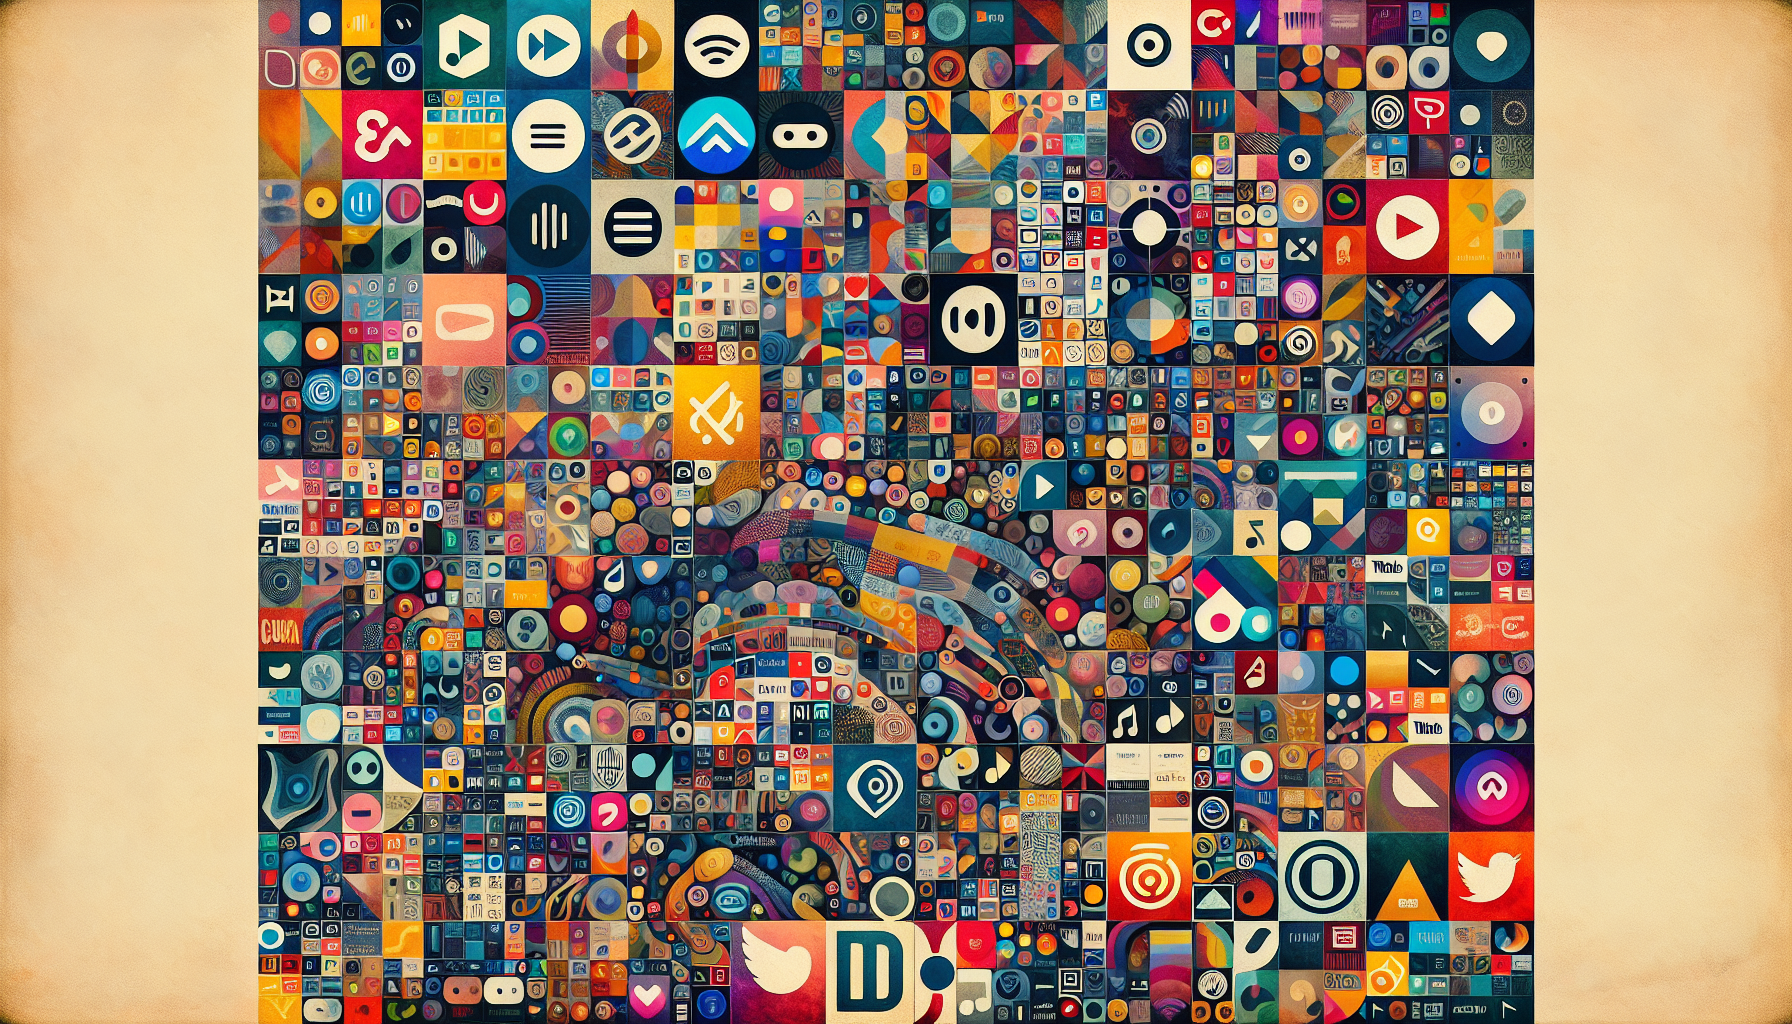 A collage of music streaming service logos and icons representing the landscape of music streaming services